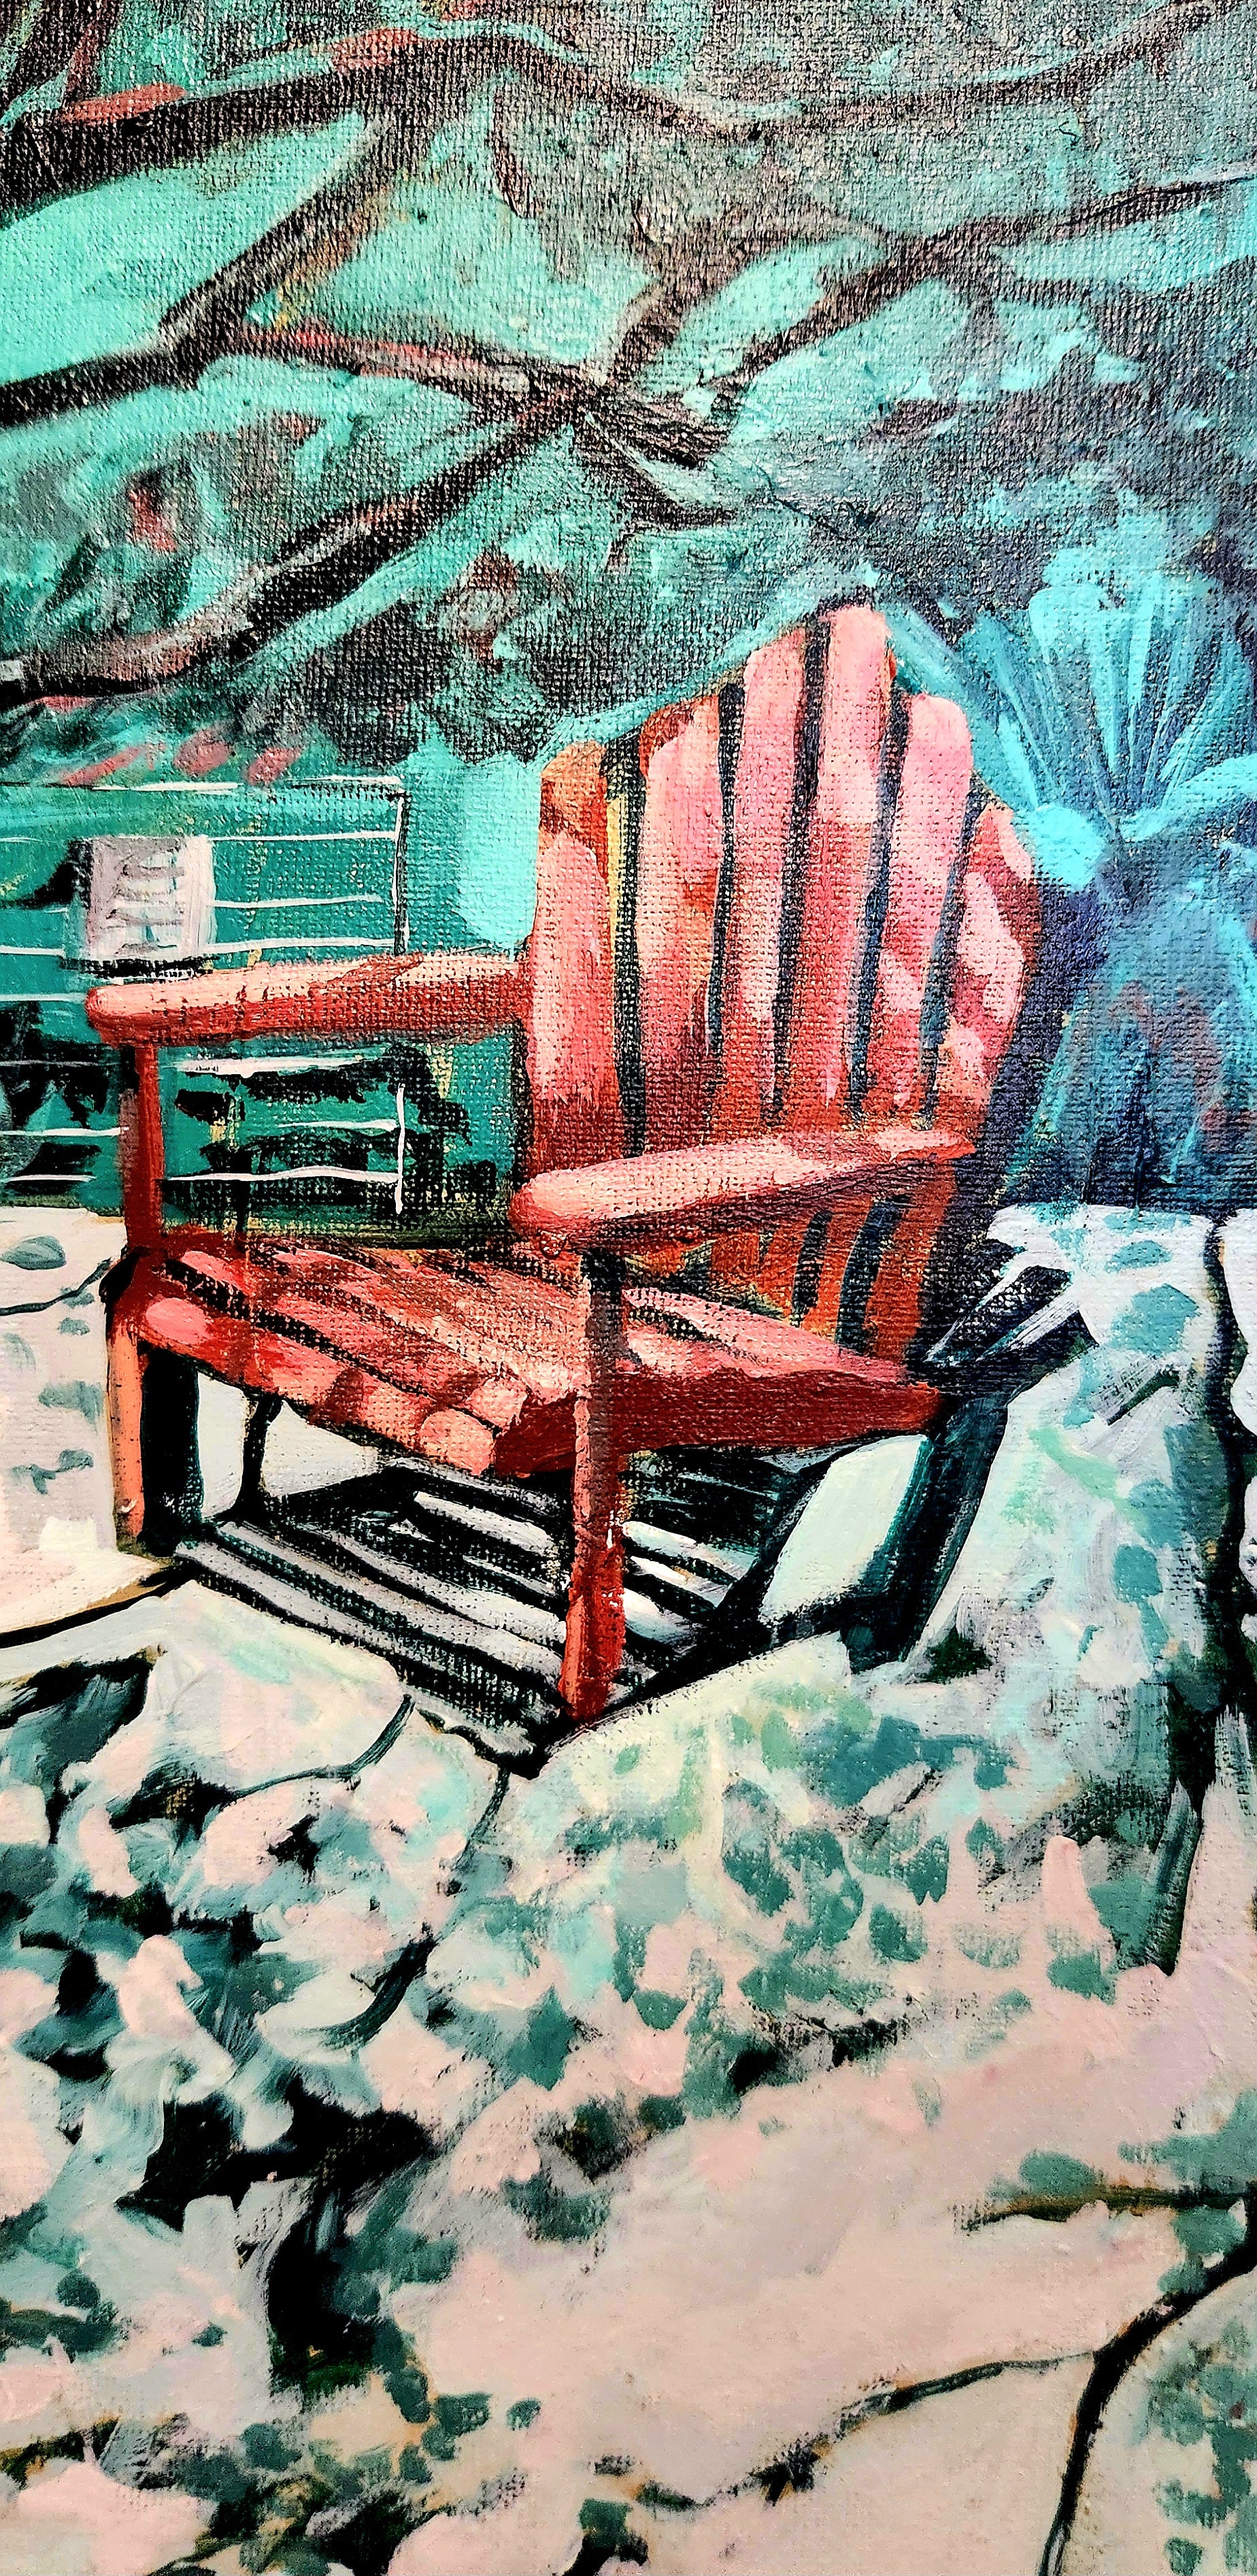 The Red chair